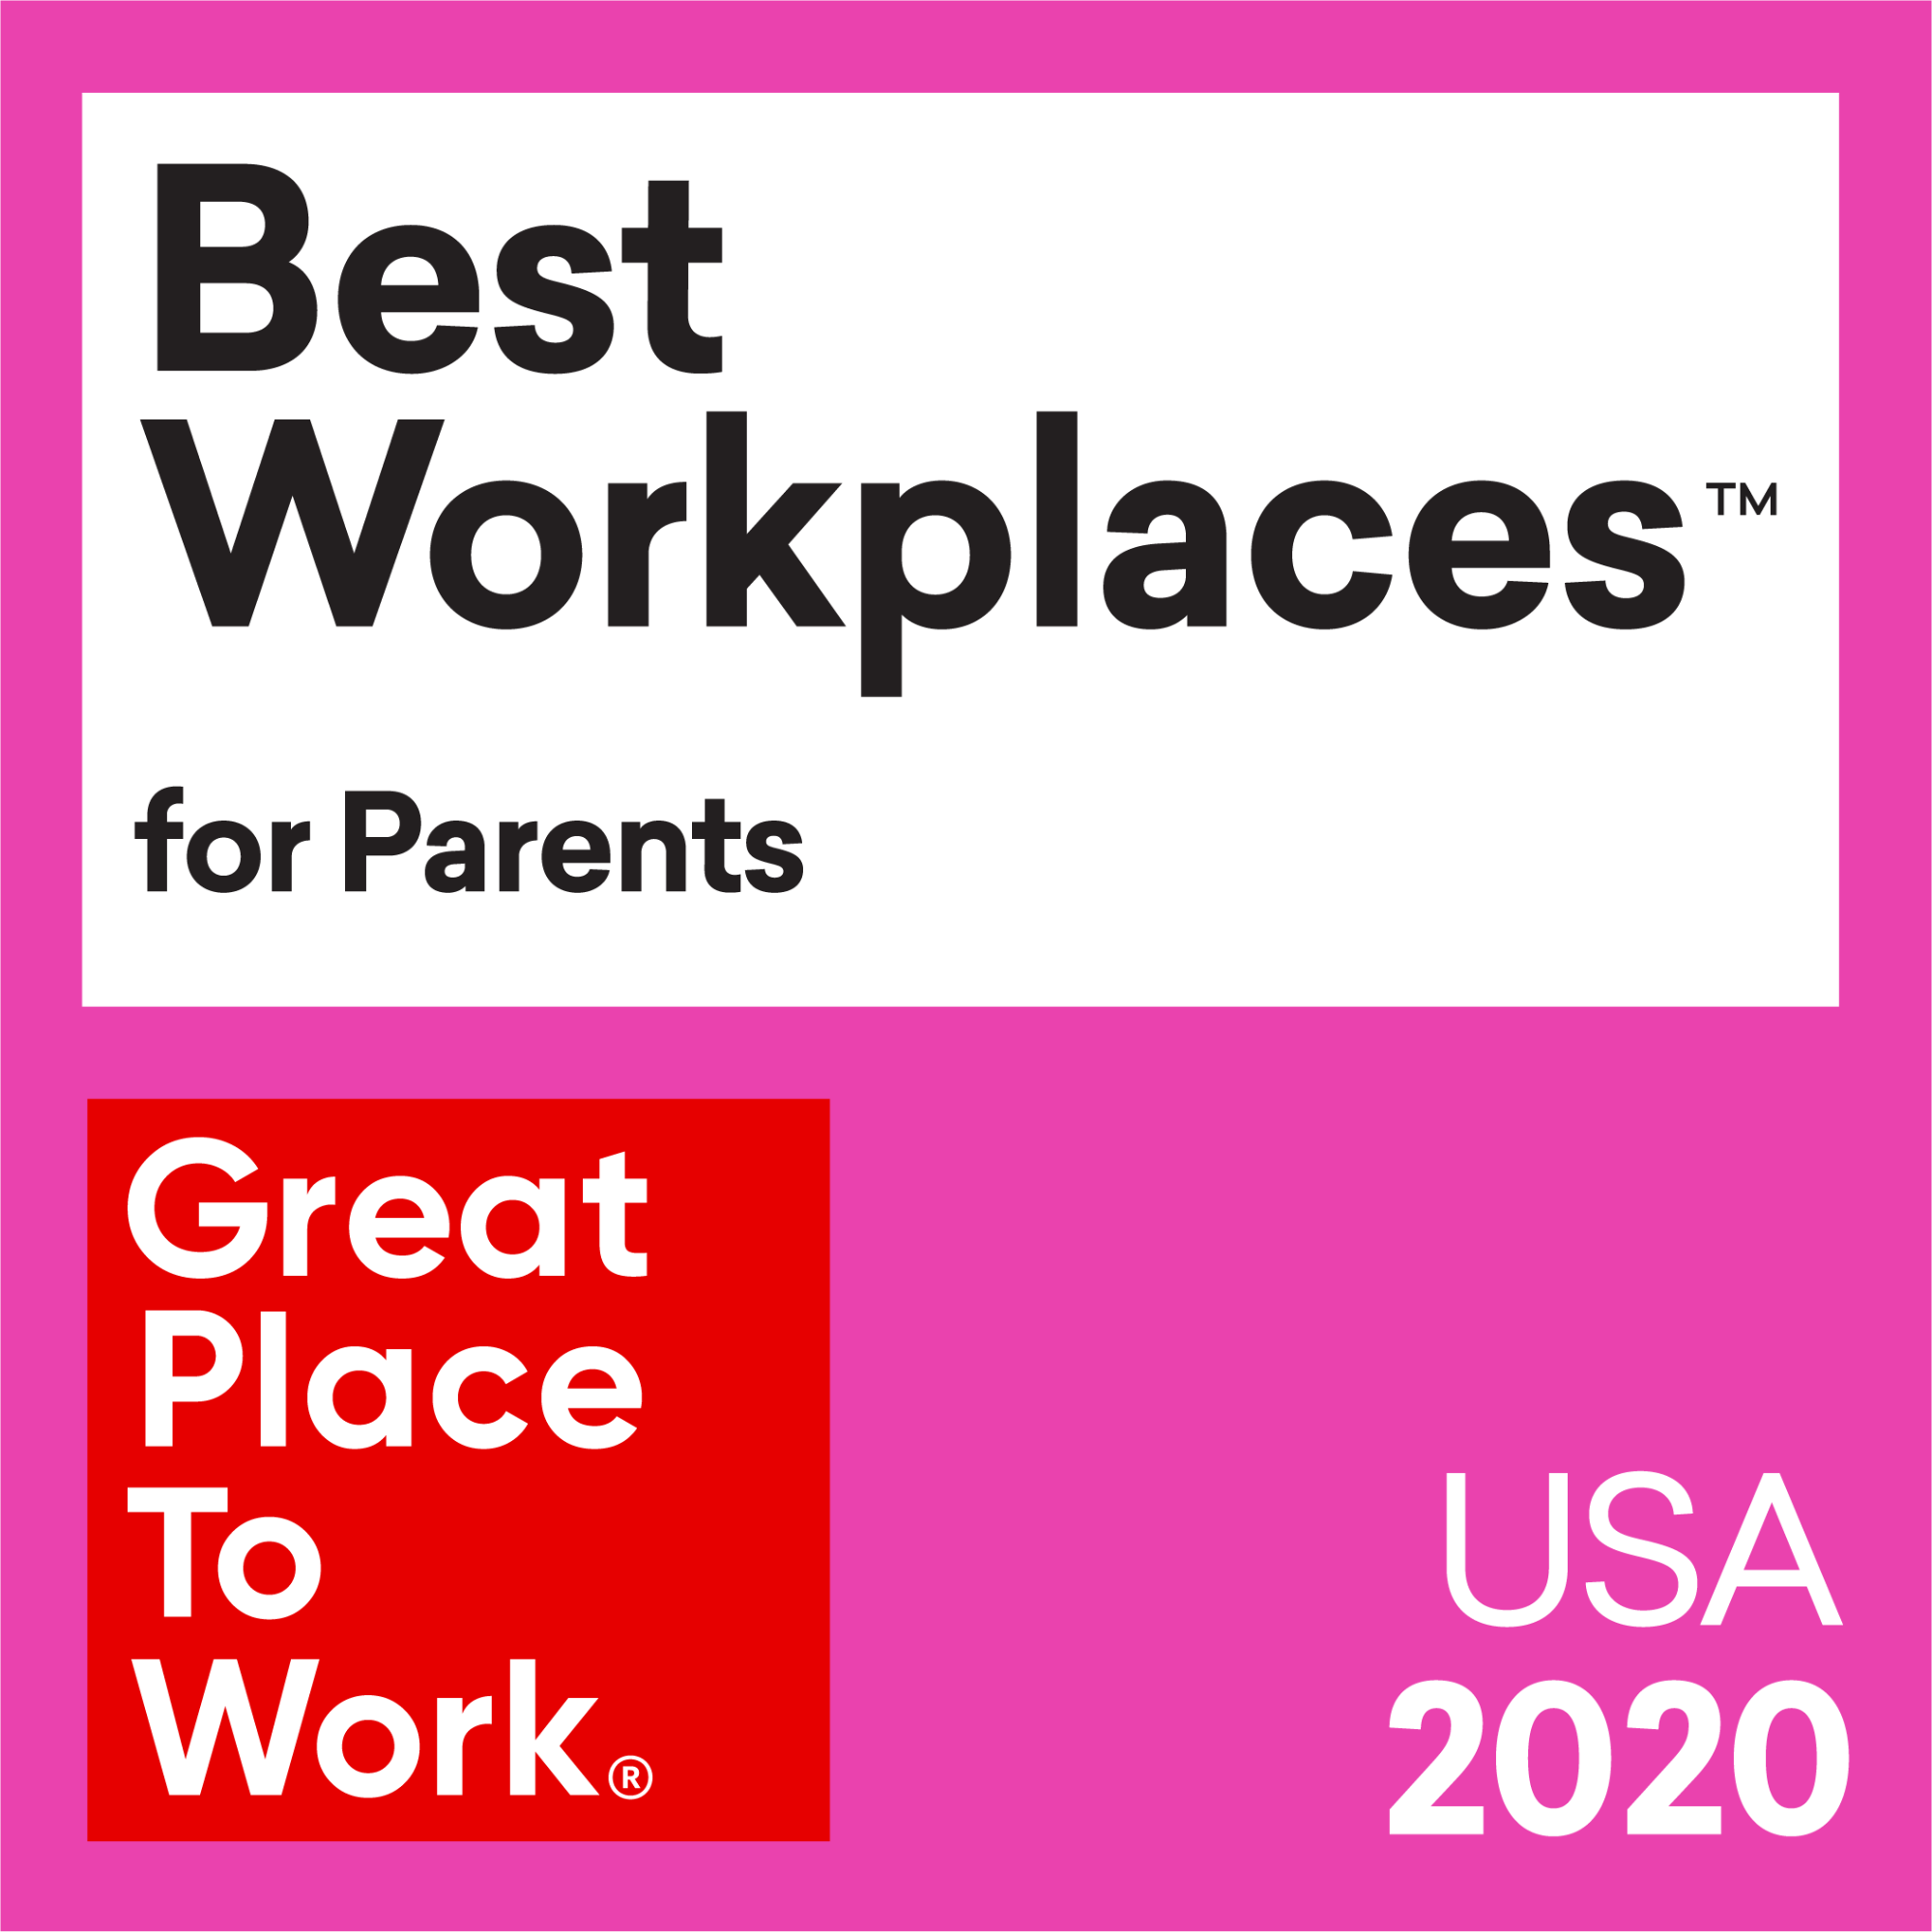 Great Place to Work: Best Workplaces for Parents 2020